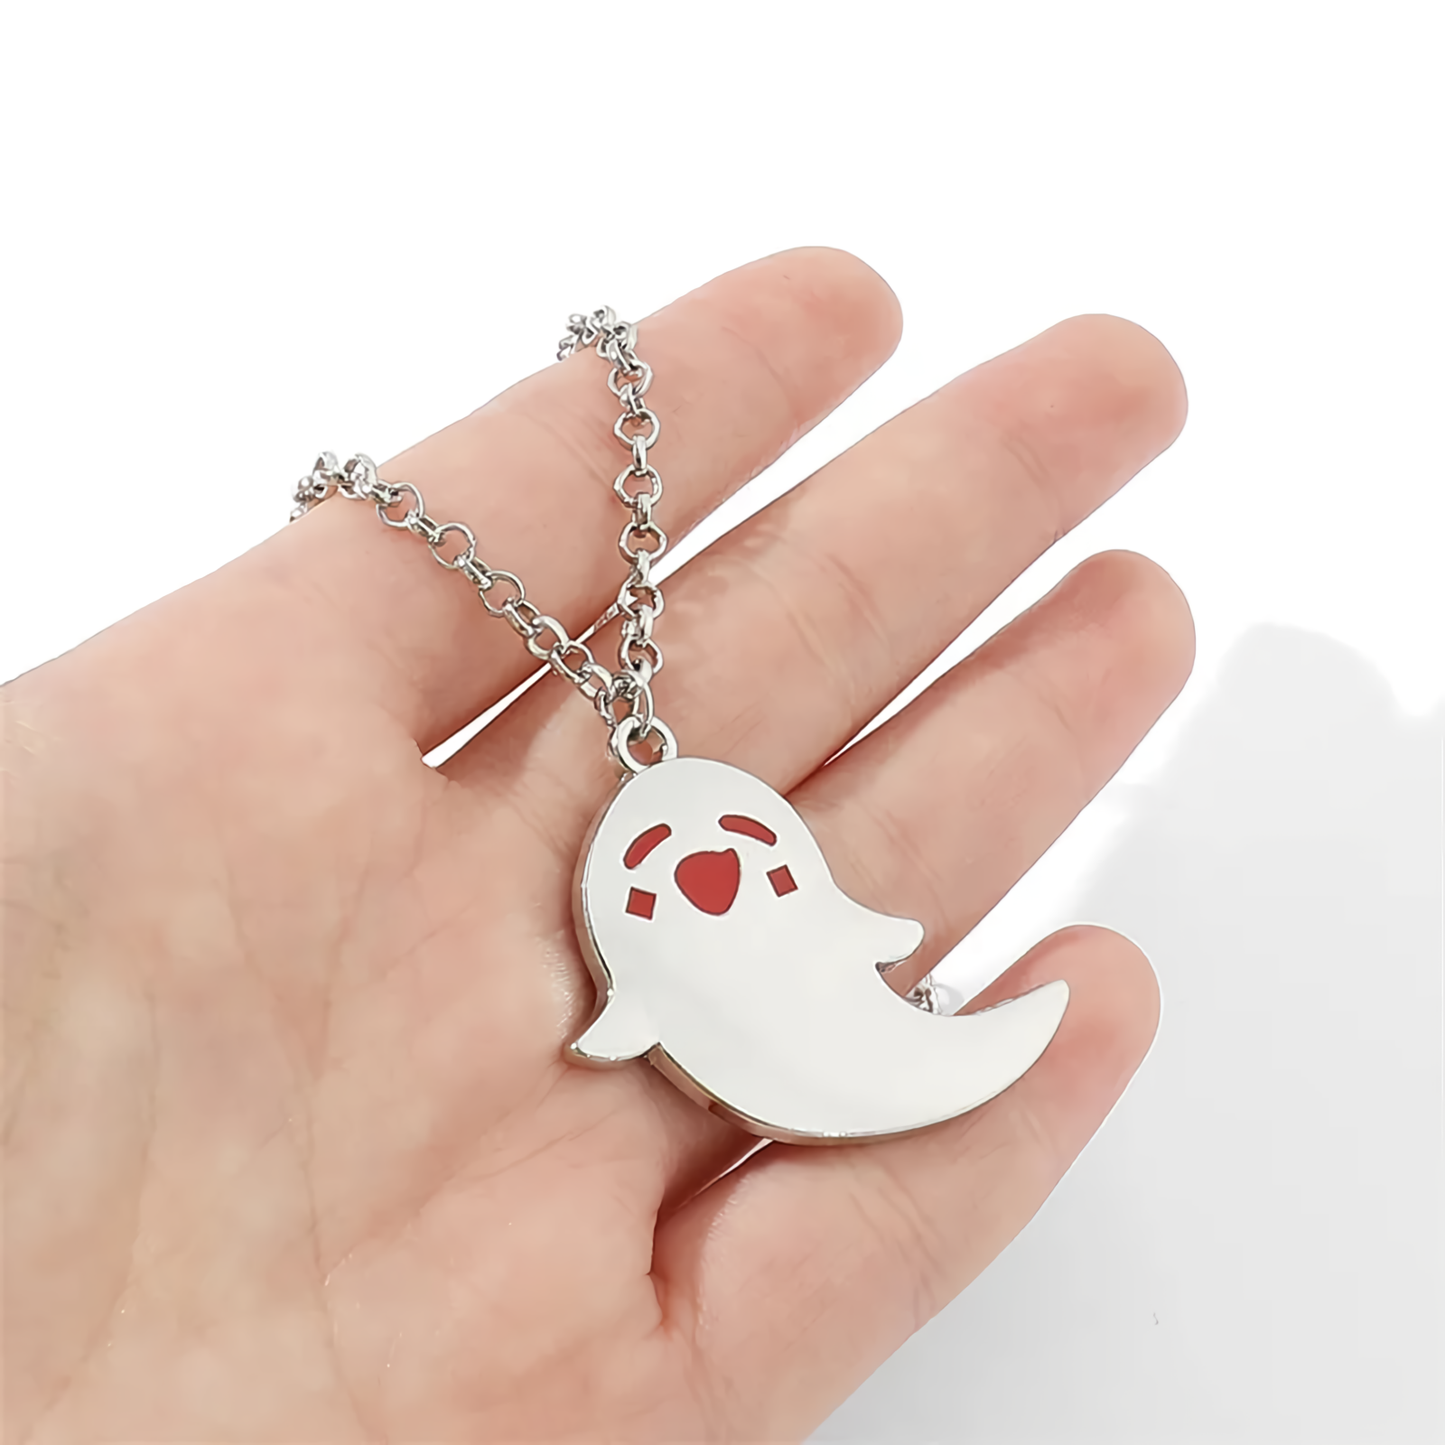 Hu Tao Ghost Necklace - Genshin 50CM | Silver Plated Rope Chain